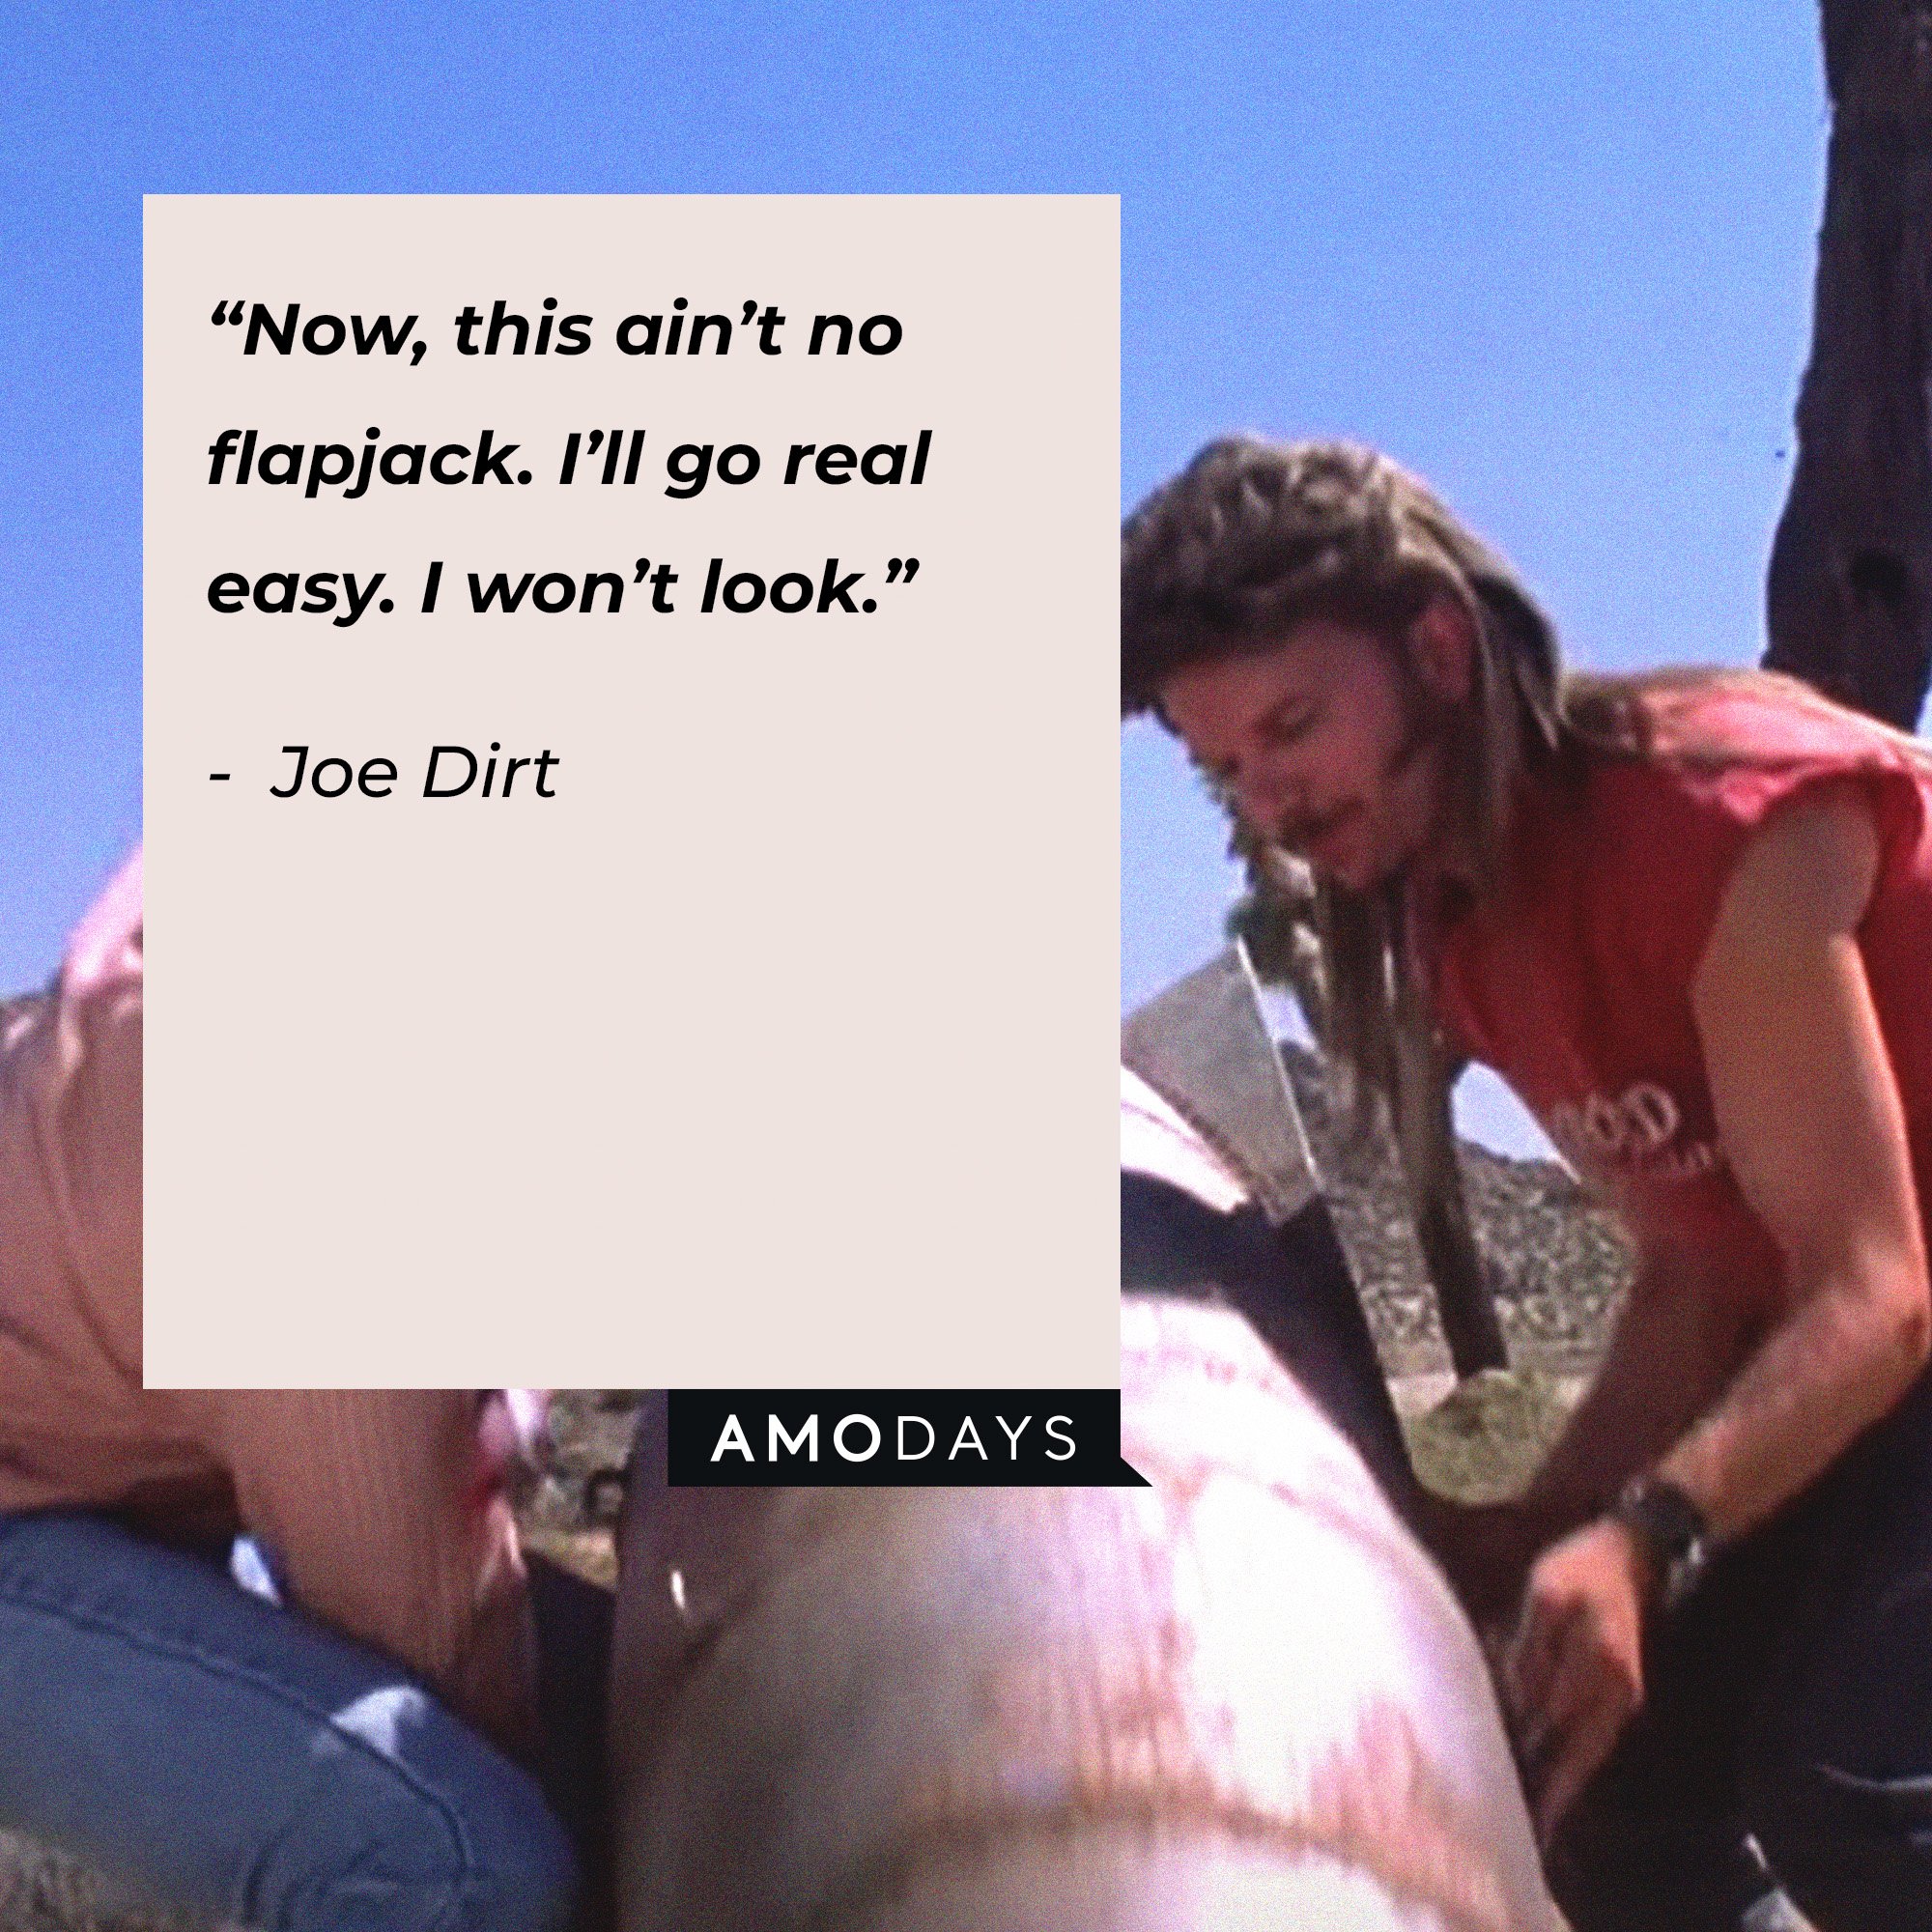 Joe Dirt's quote: “Now, this ain’t no flapjack. I’ll go real easy. I won’t look.” | Image: AmoDays